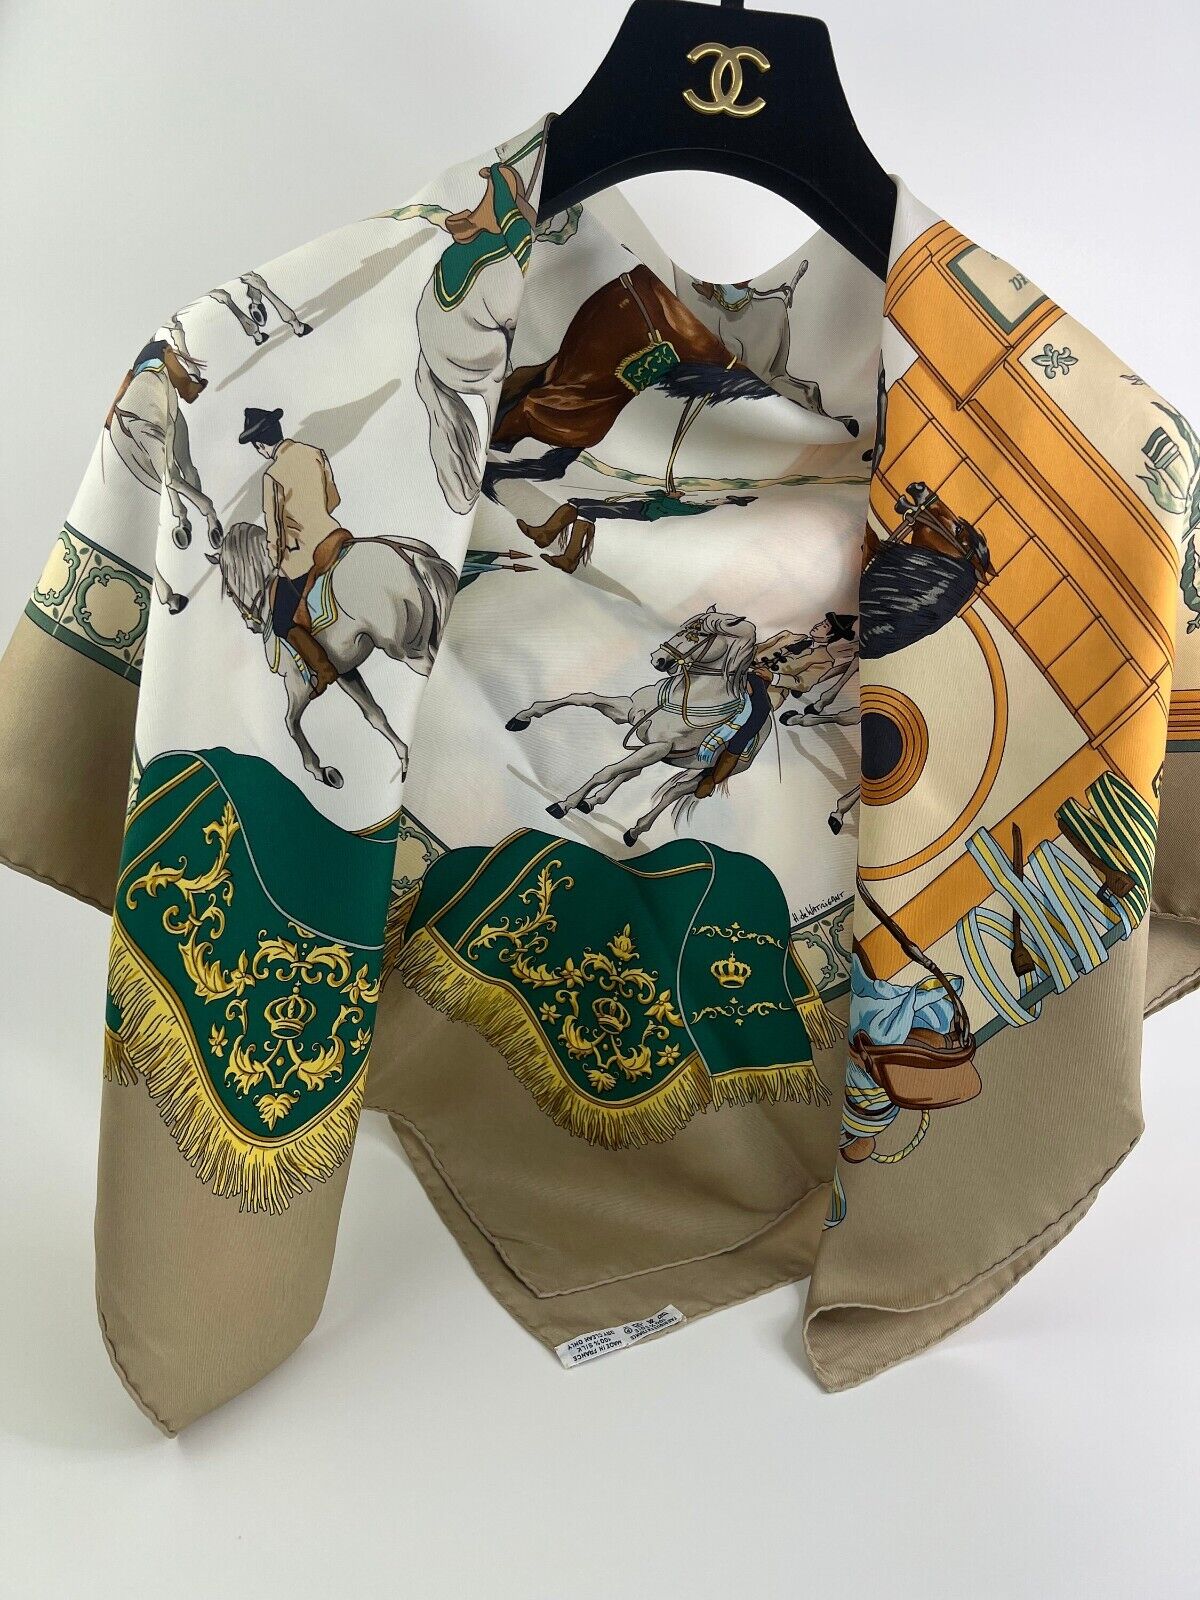 Hermes Scarf Vintage Real Escuela Andaluza Del Arte Ecuestre, Silk scarf, gift for her, Made in france scarf, Silk Scarves, Hermes Carre